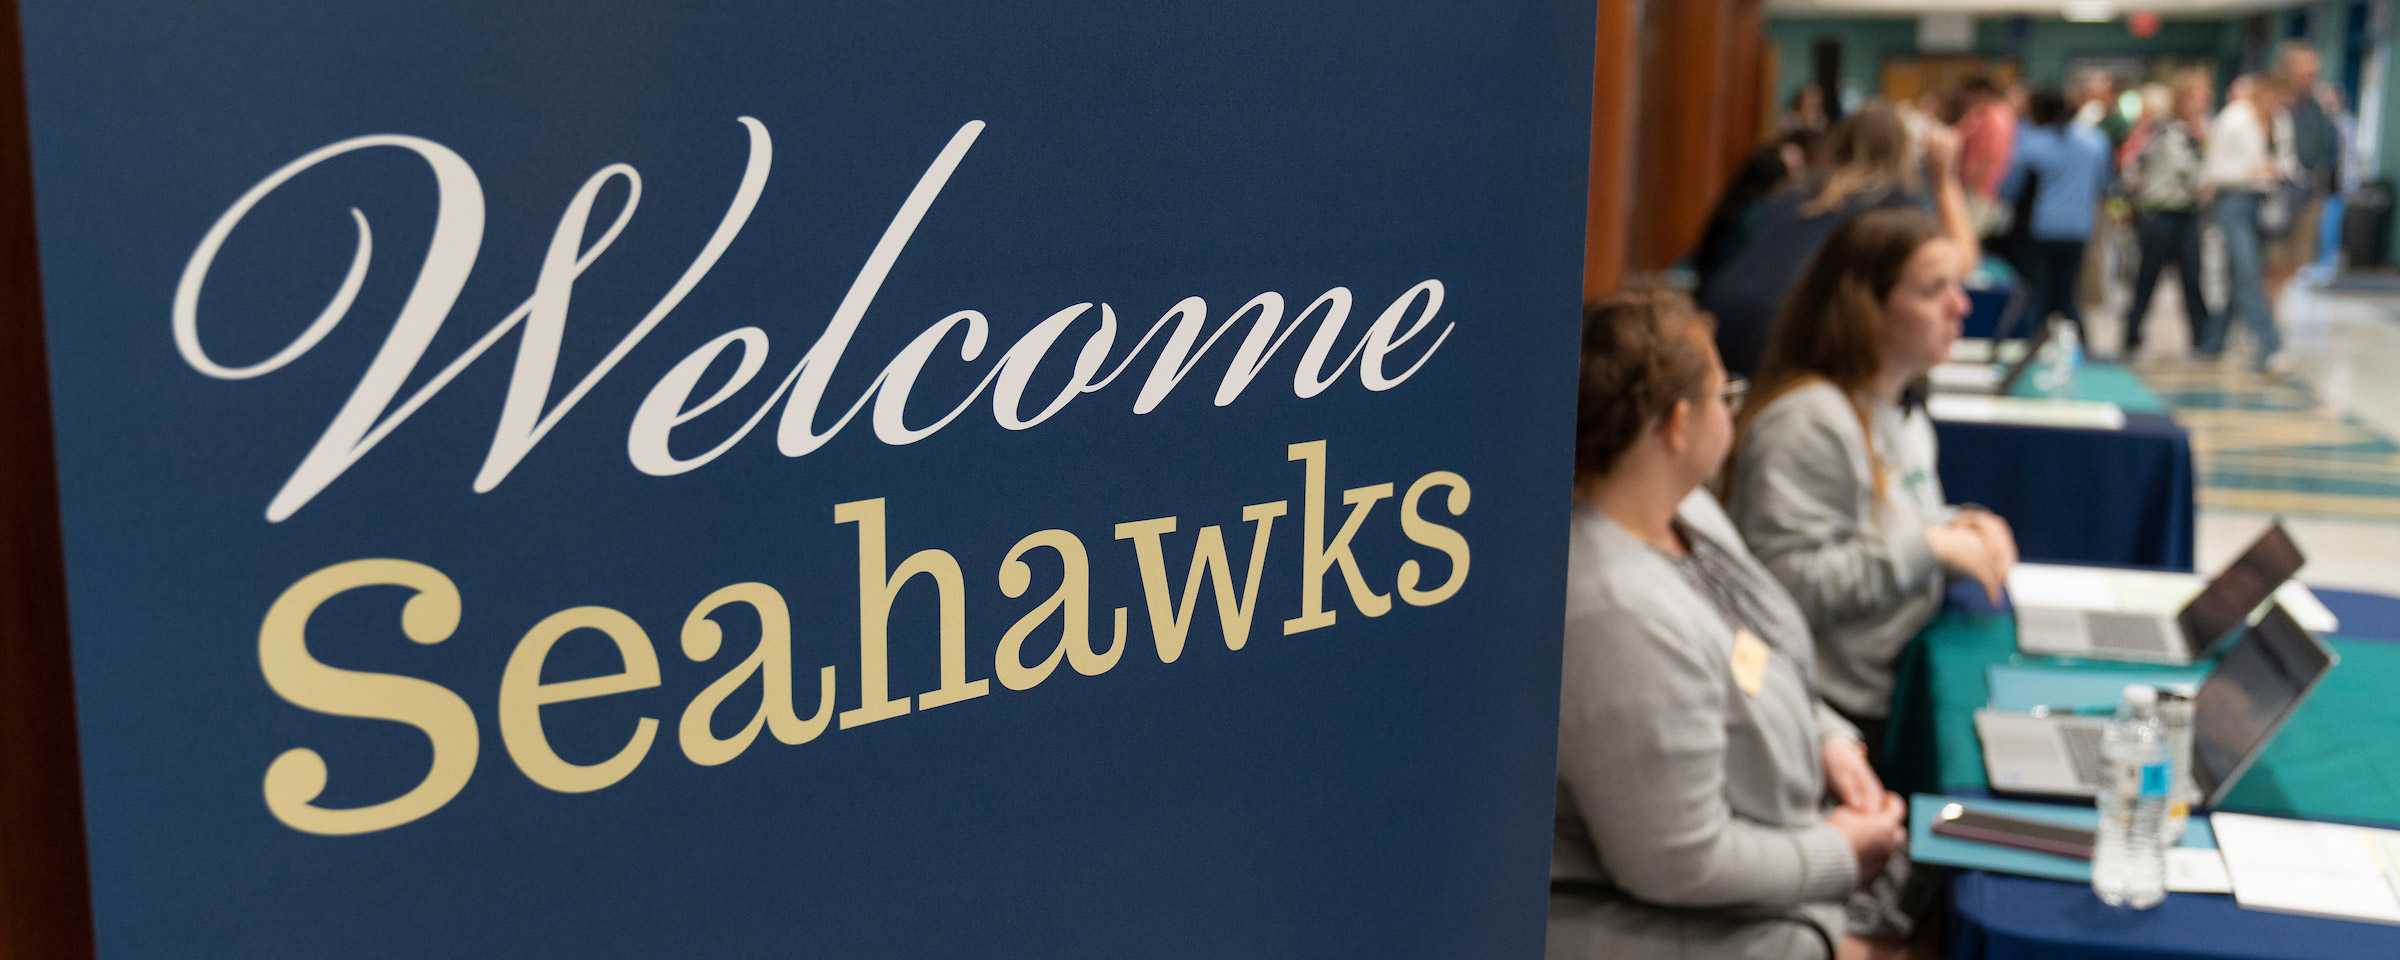 Welcome Seahawks sign on campus